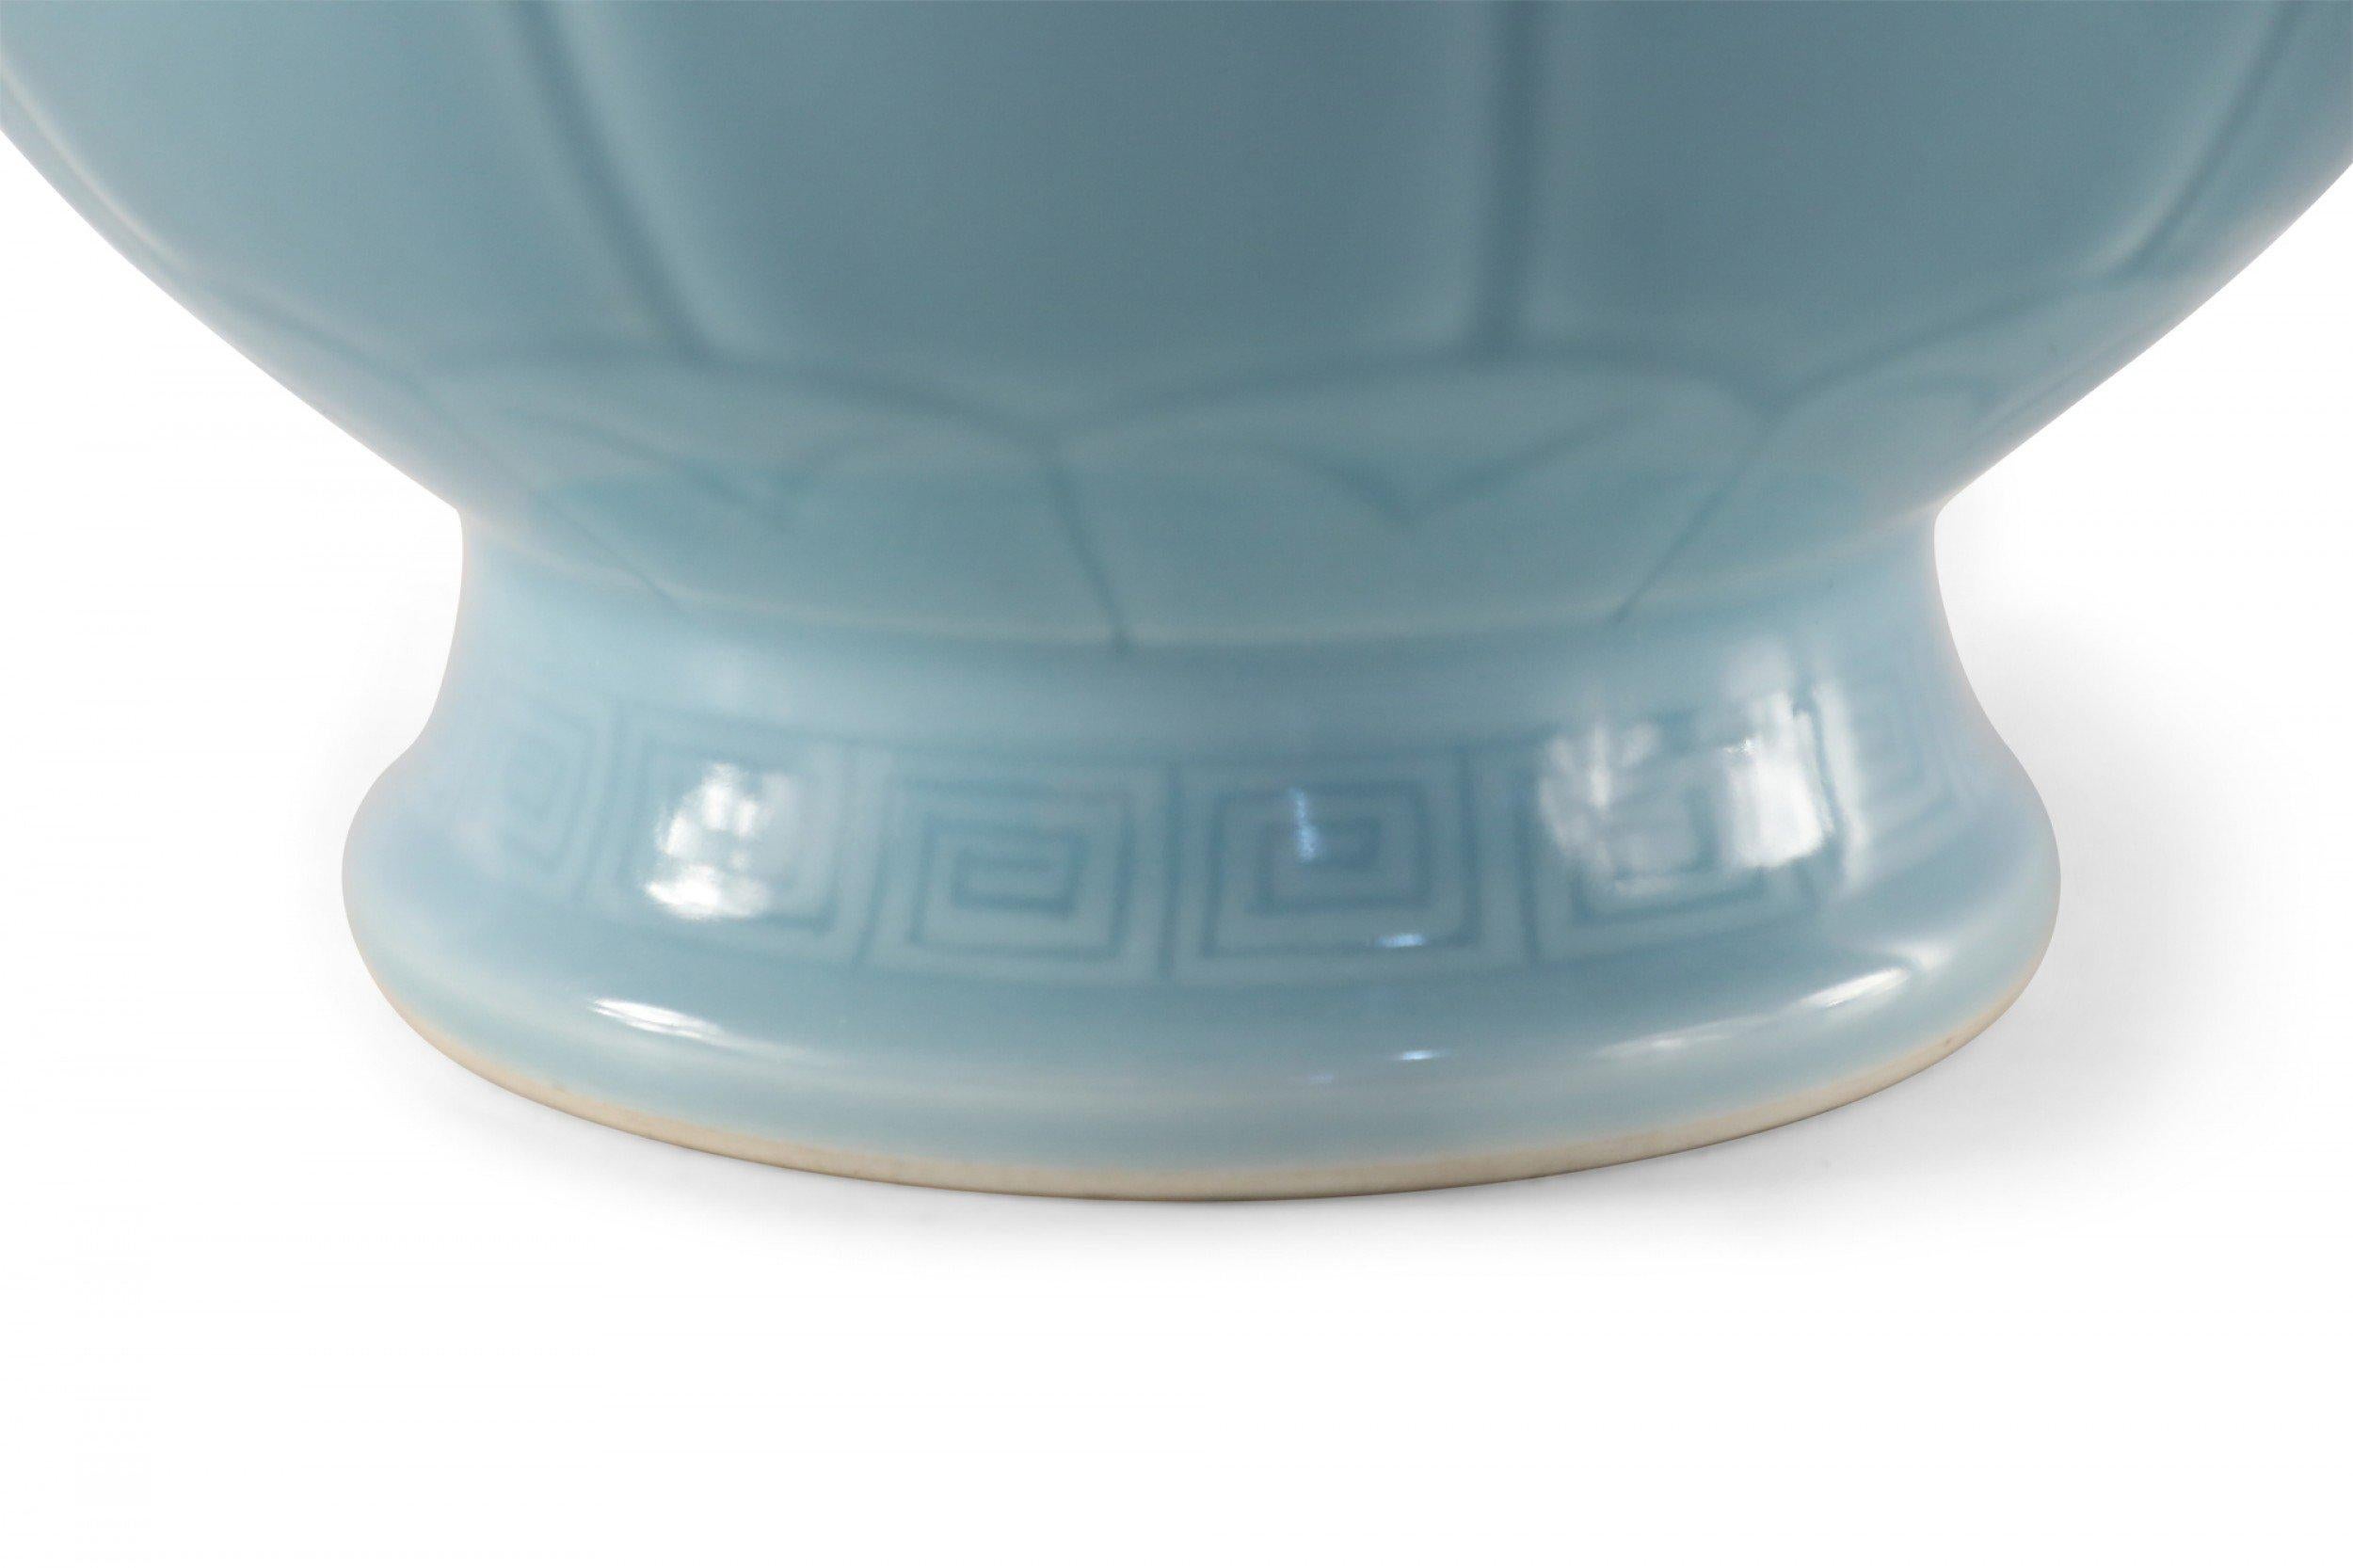 Chinese Qing Dynasty Qianlong period (20th century) porcelain vase in light blue, accented with a tonal pattern that emphasizes its globular shape and doorknocker ornamentation along the sides (date mark on bottom).
     